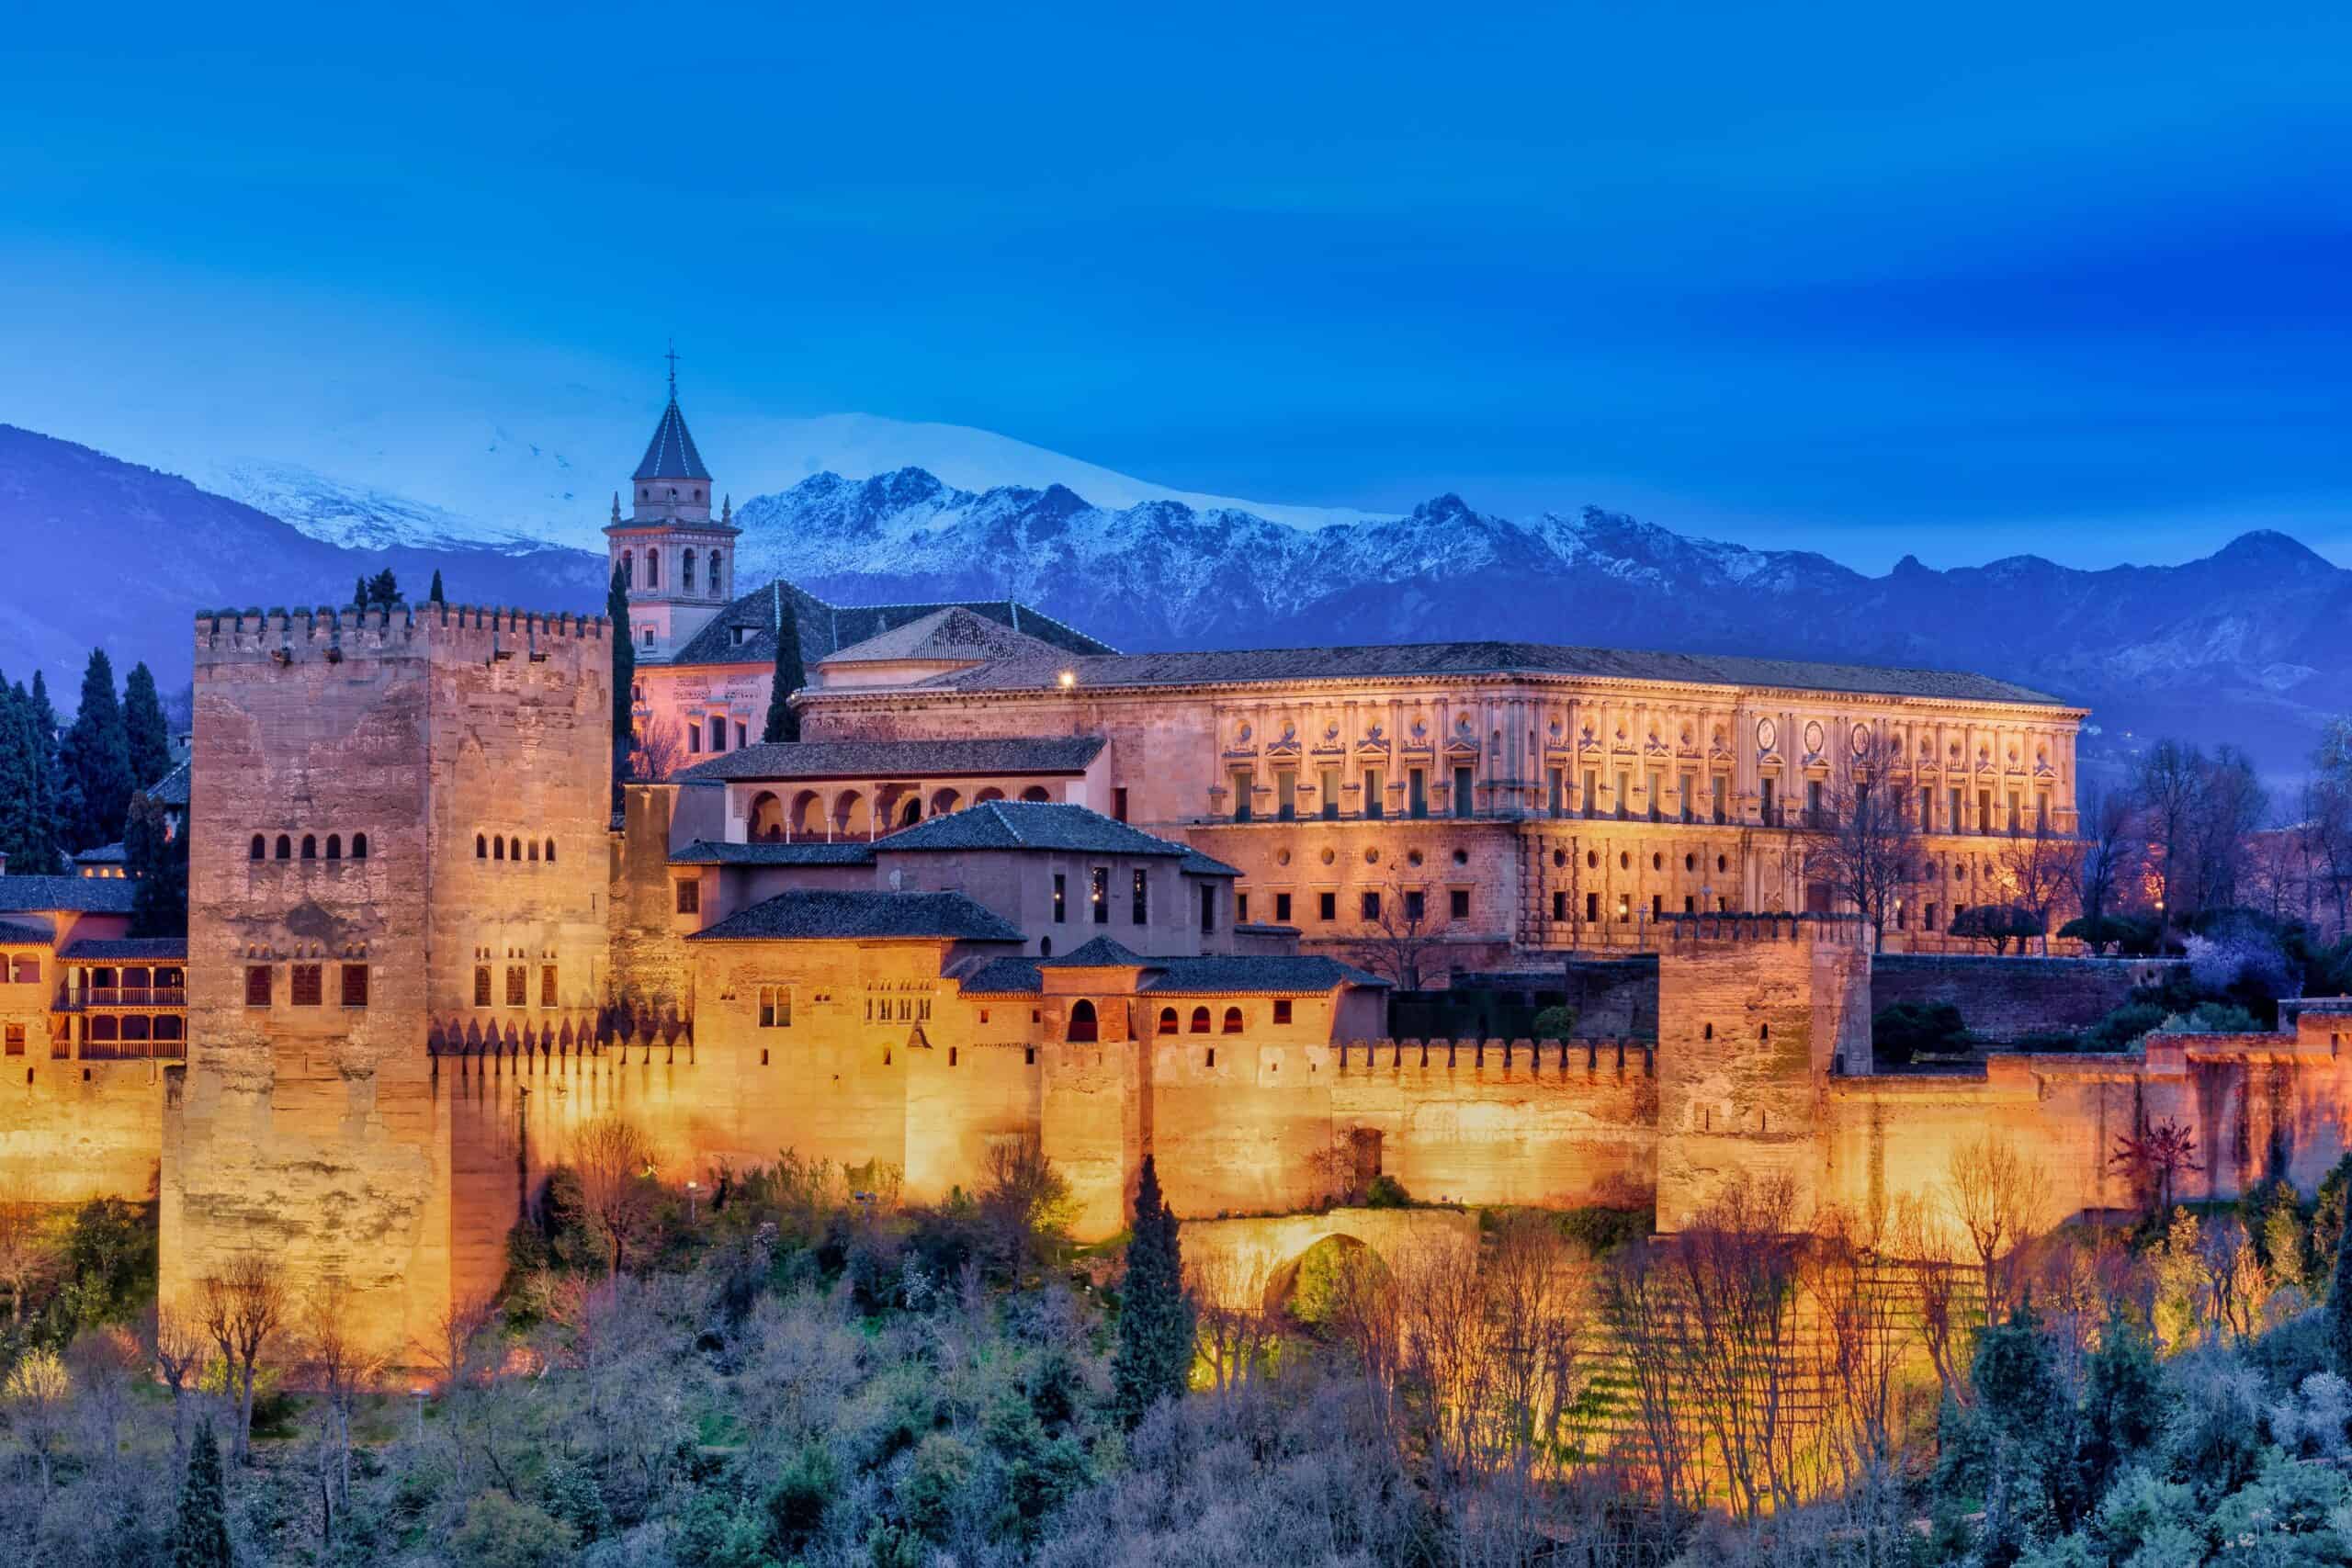 <p>Granada, with its iconic Alhambra, offers retirees a glimpse into Spain’s Moorish history. Wander through the Albaicín, enjoy tapas in bustling markets, and savor the city’s cultural richness.</p>